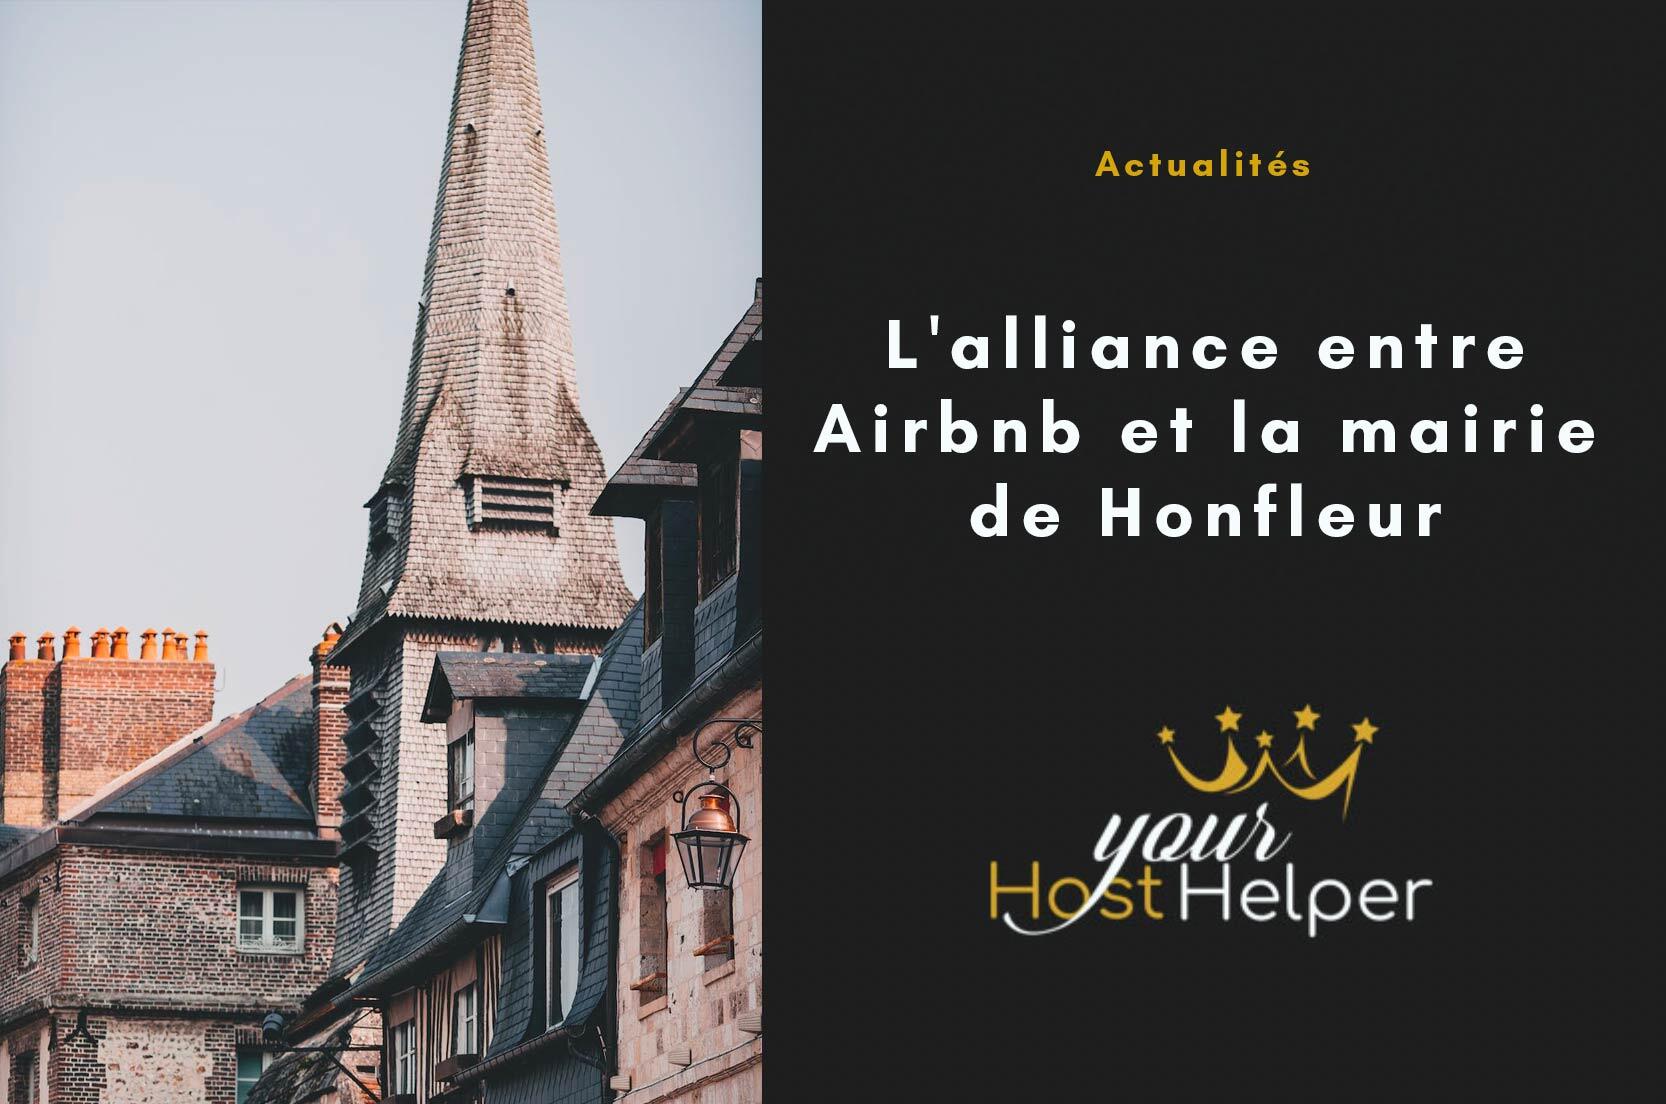 You are currently viewing Our Honfleur concierge explains the alliance between Airbnb and the Town Hall